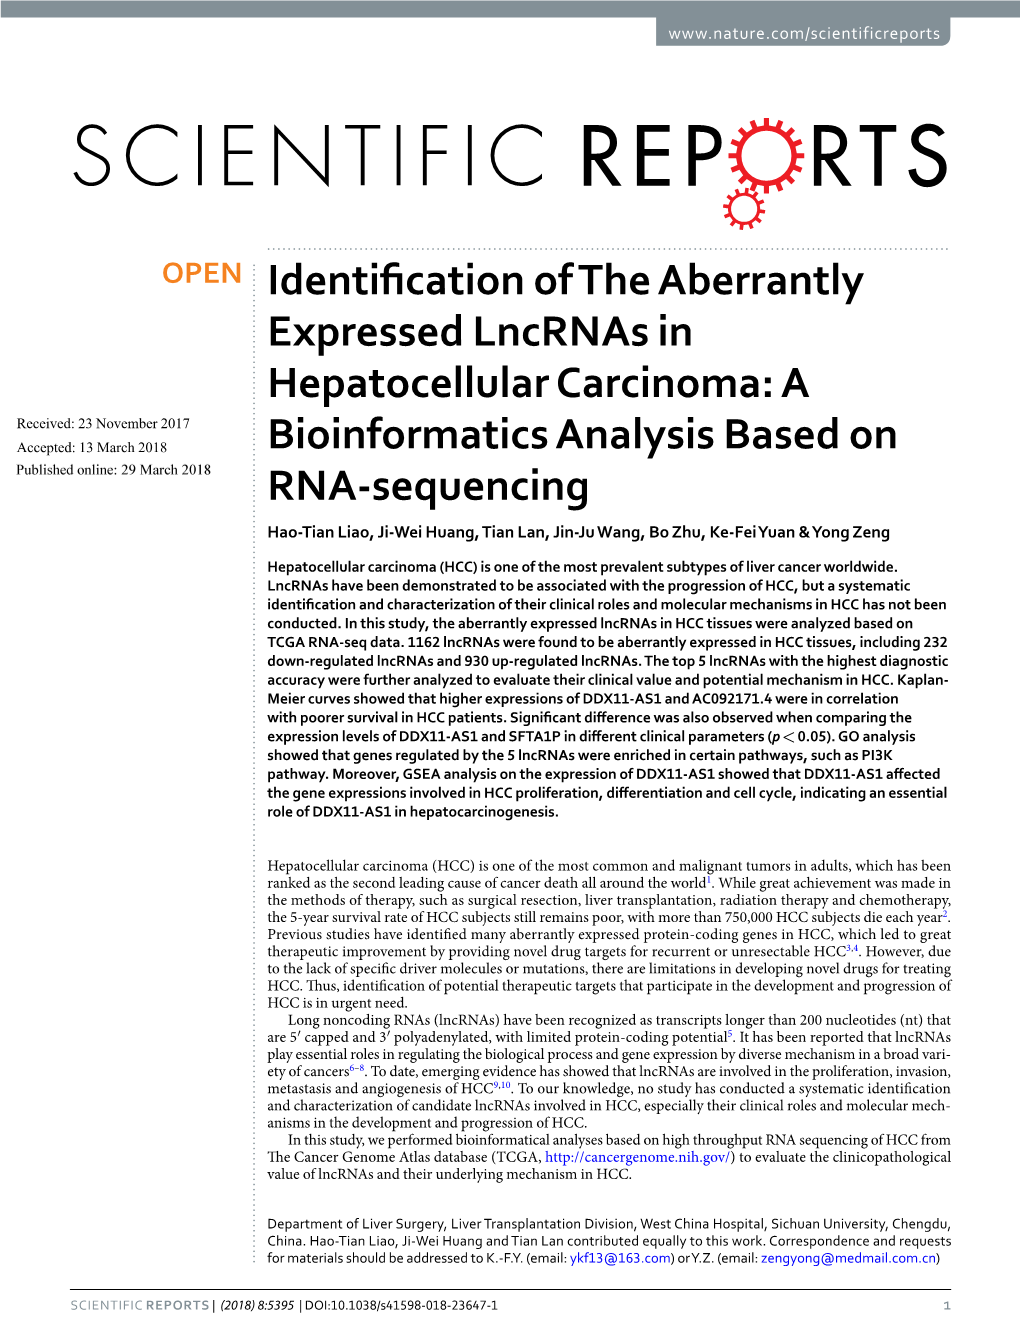 Identification of the Aberrantly Expressed Lncrnas In